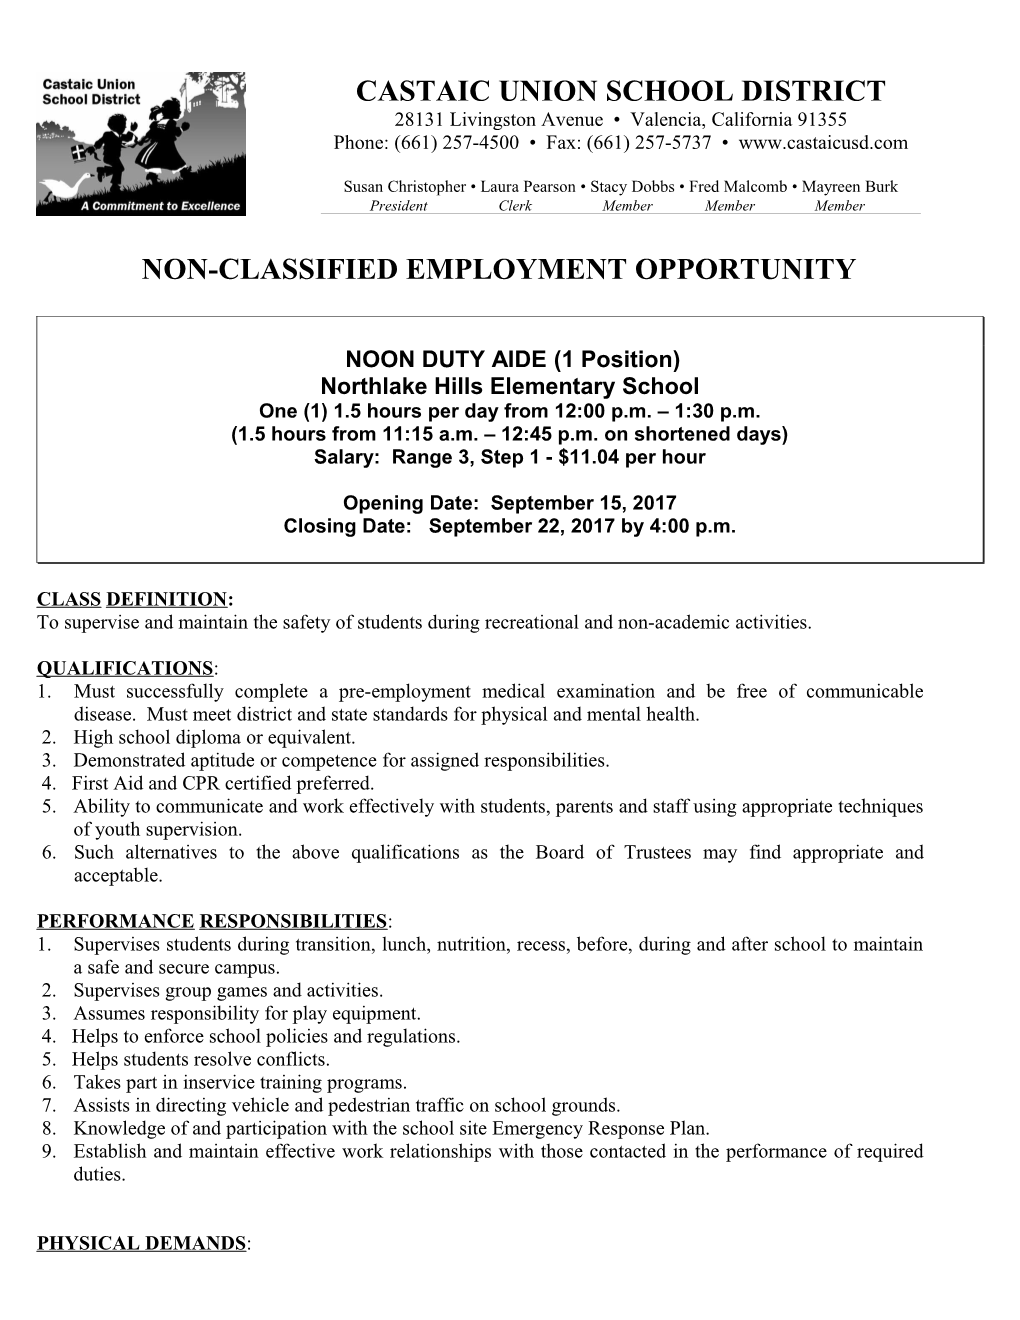 Non-Classified Employment Opportunity